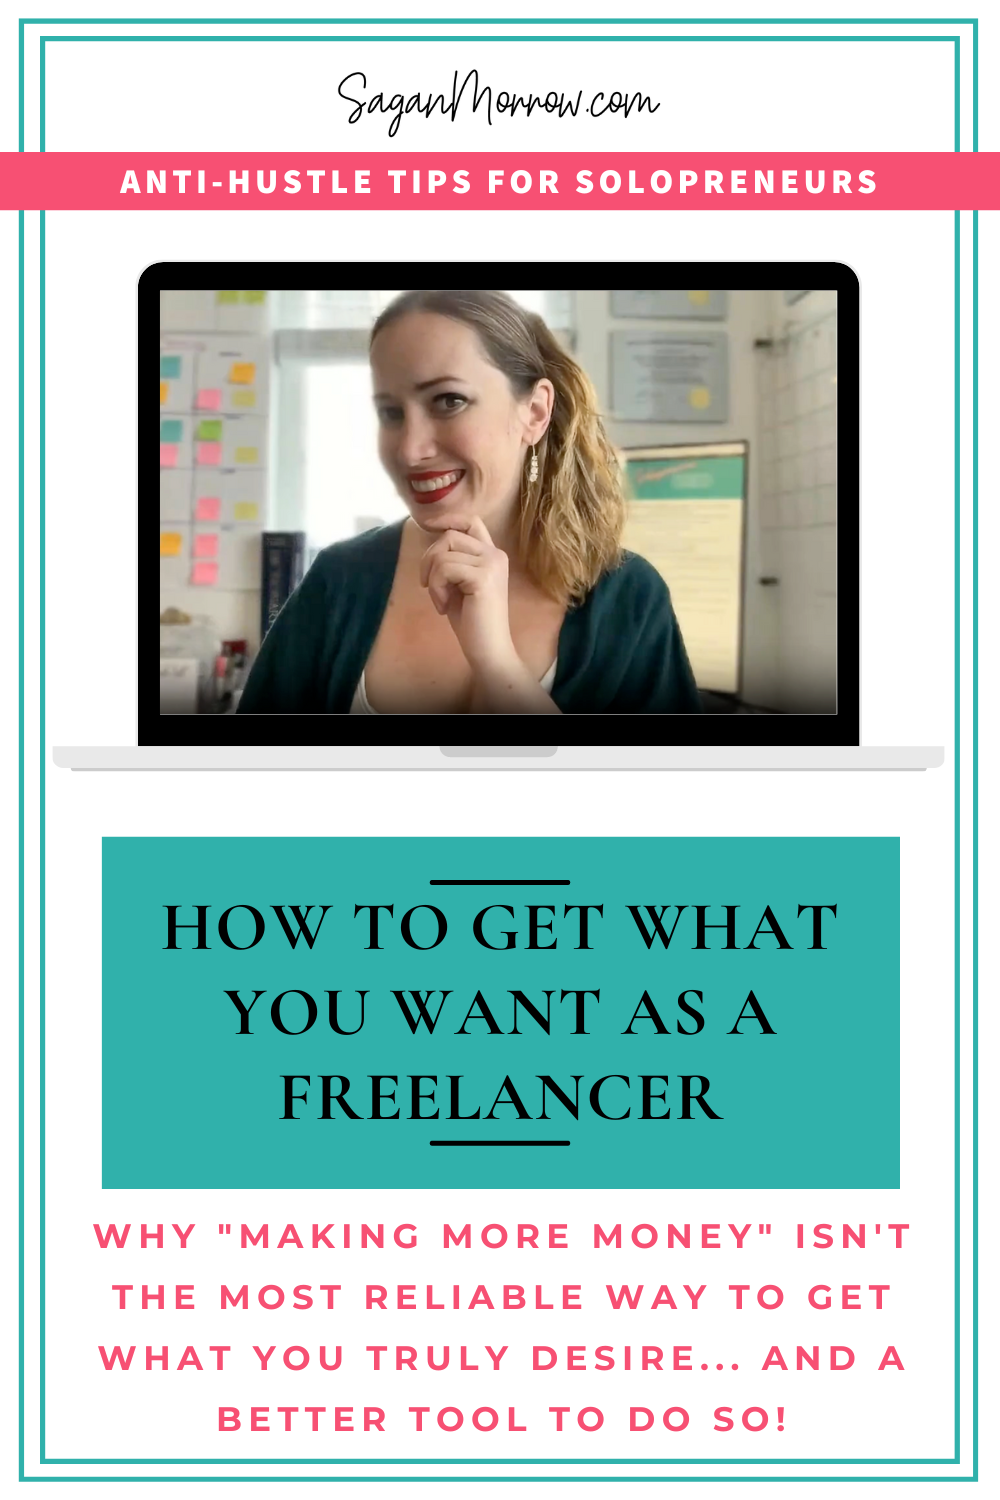 Do you ever wish you could wave a magic wand in order to get what you want in life and business? What if you could FINALLY get what you actually want — without needing to rely on external factors? In today’s video, let’s talk about your most reliable tool as a freelancer (or other type of solopreneur), that will help you to achieve your goals and live the life and build the business you most desire...

(SPOILER ALERT — it is NOT money! Money is not your most reliable tool, because it depends on other people. But *this* can get you more of what you want... and it's entirely internal.)